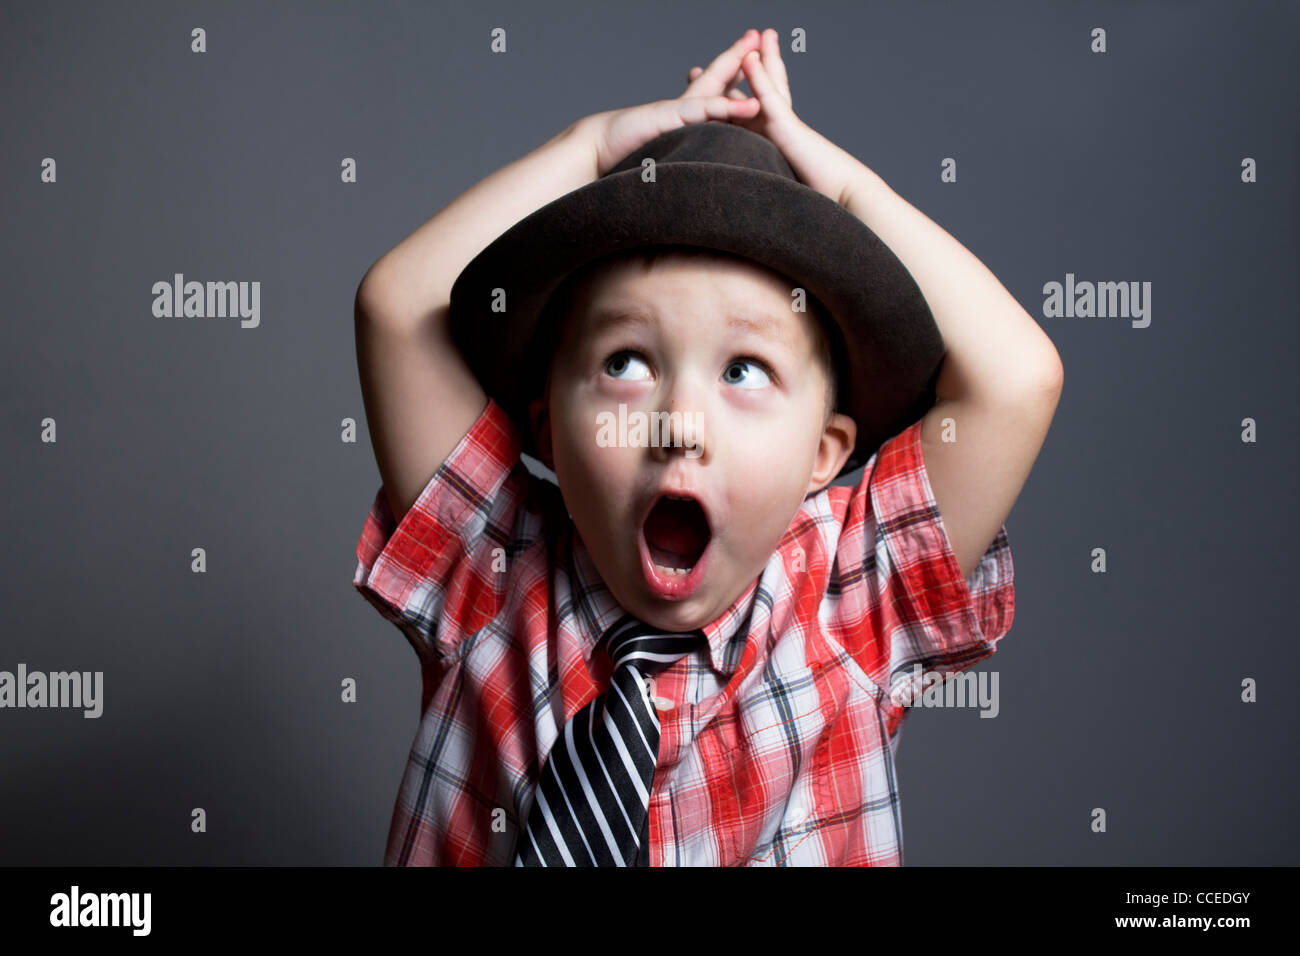 The boy in a hat on a gray background Stock Photo